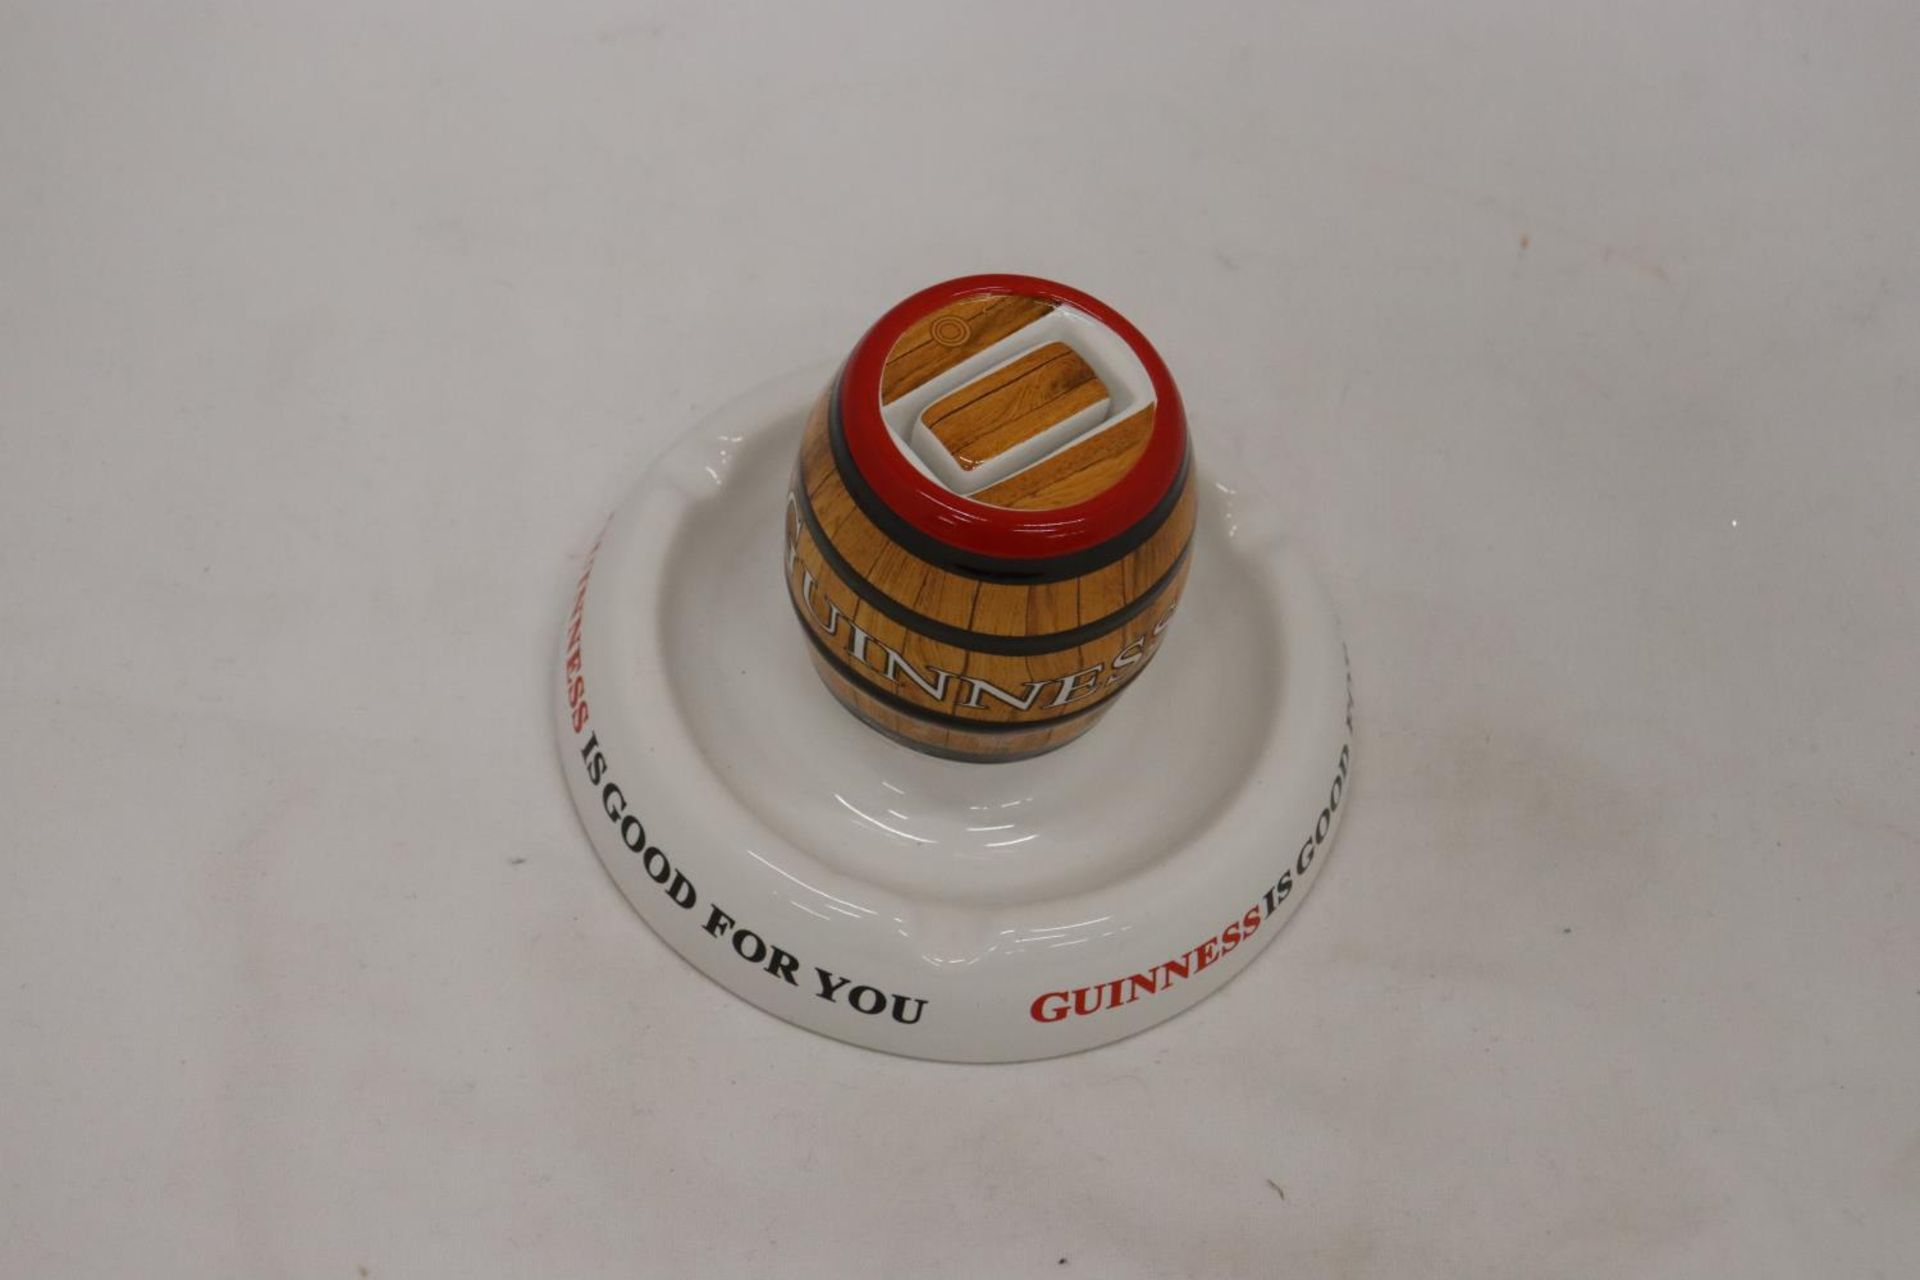 A MINTONS GUINESS ADVERTISING ASHTRAY - Image 4 of 4